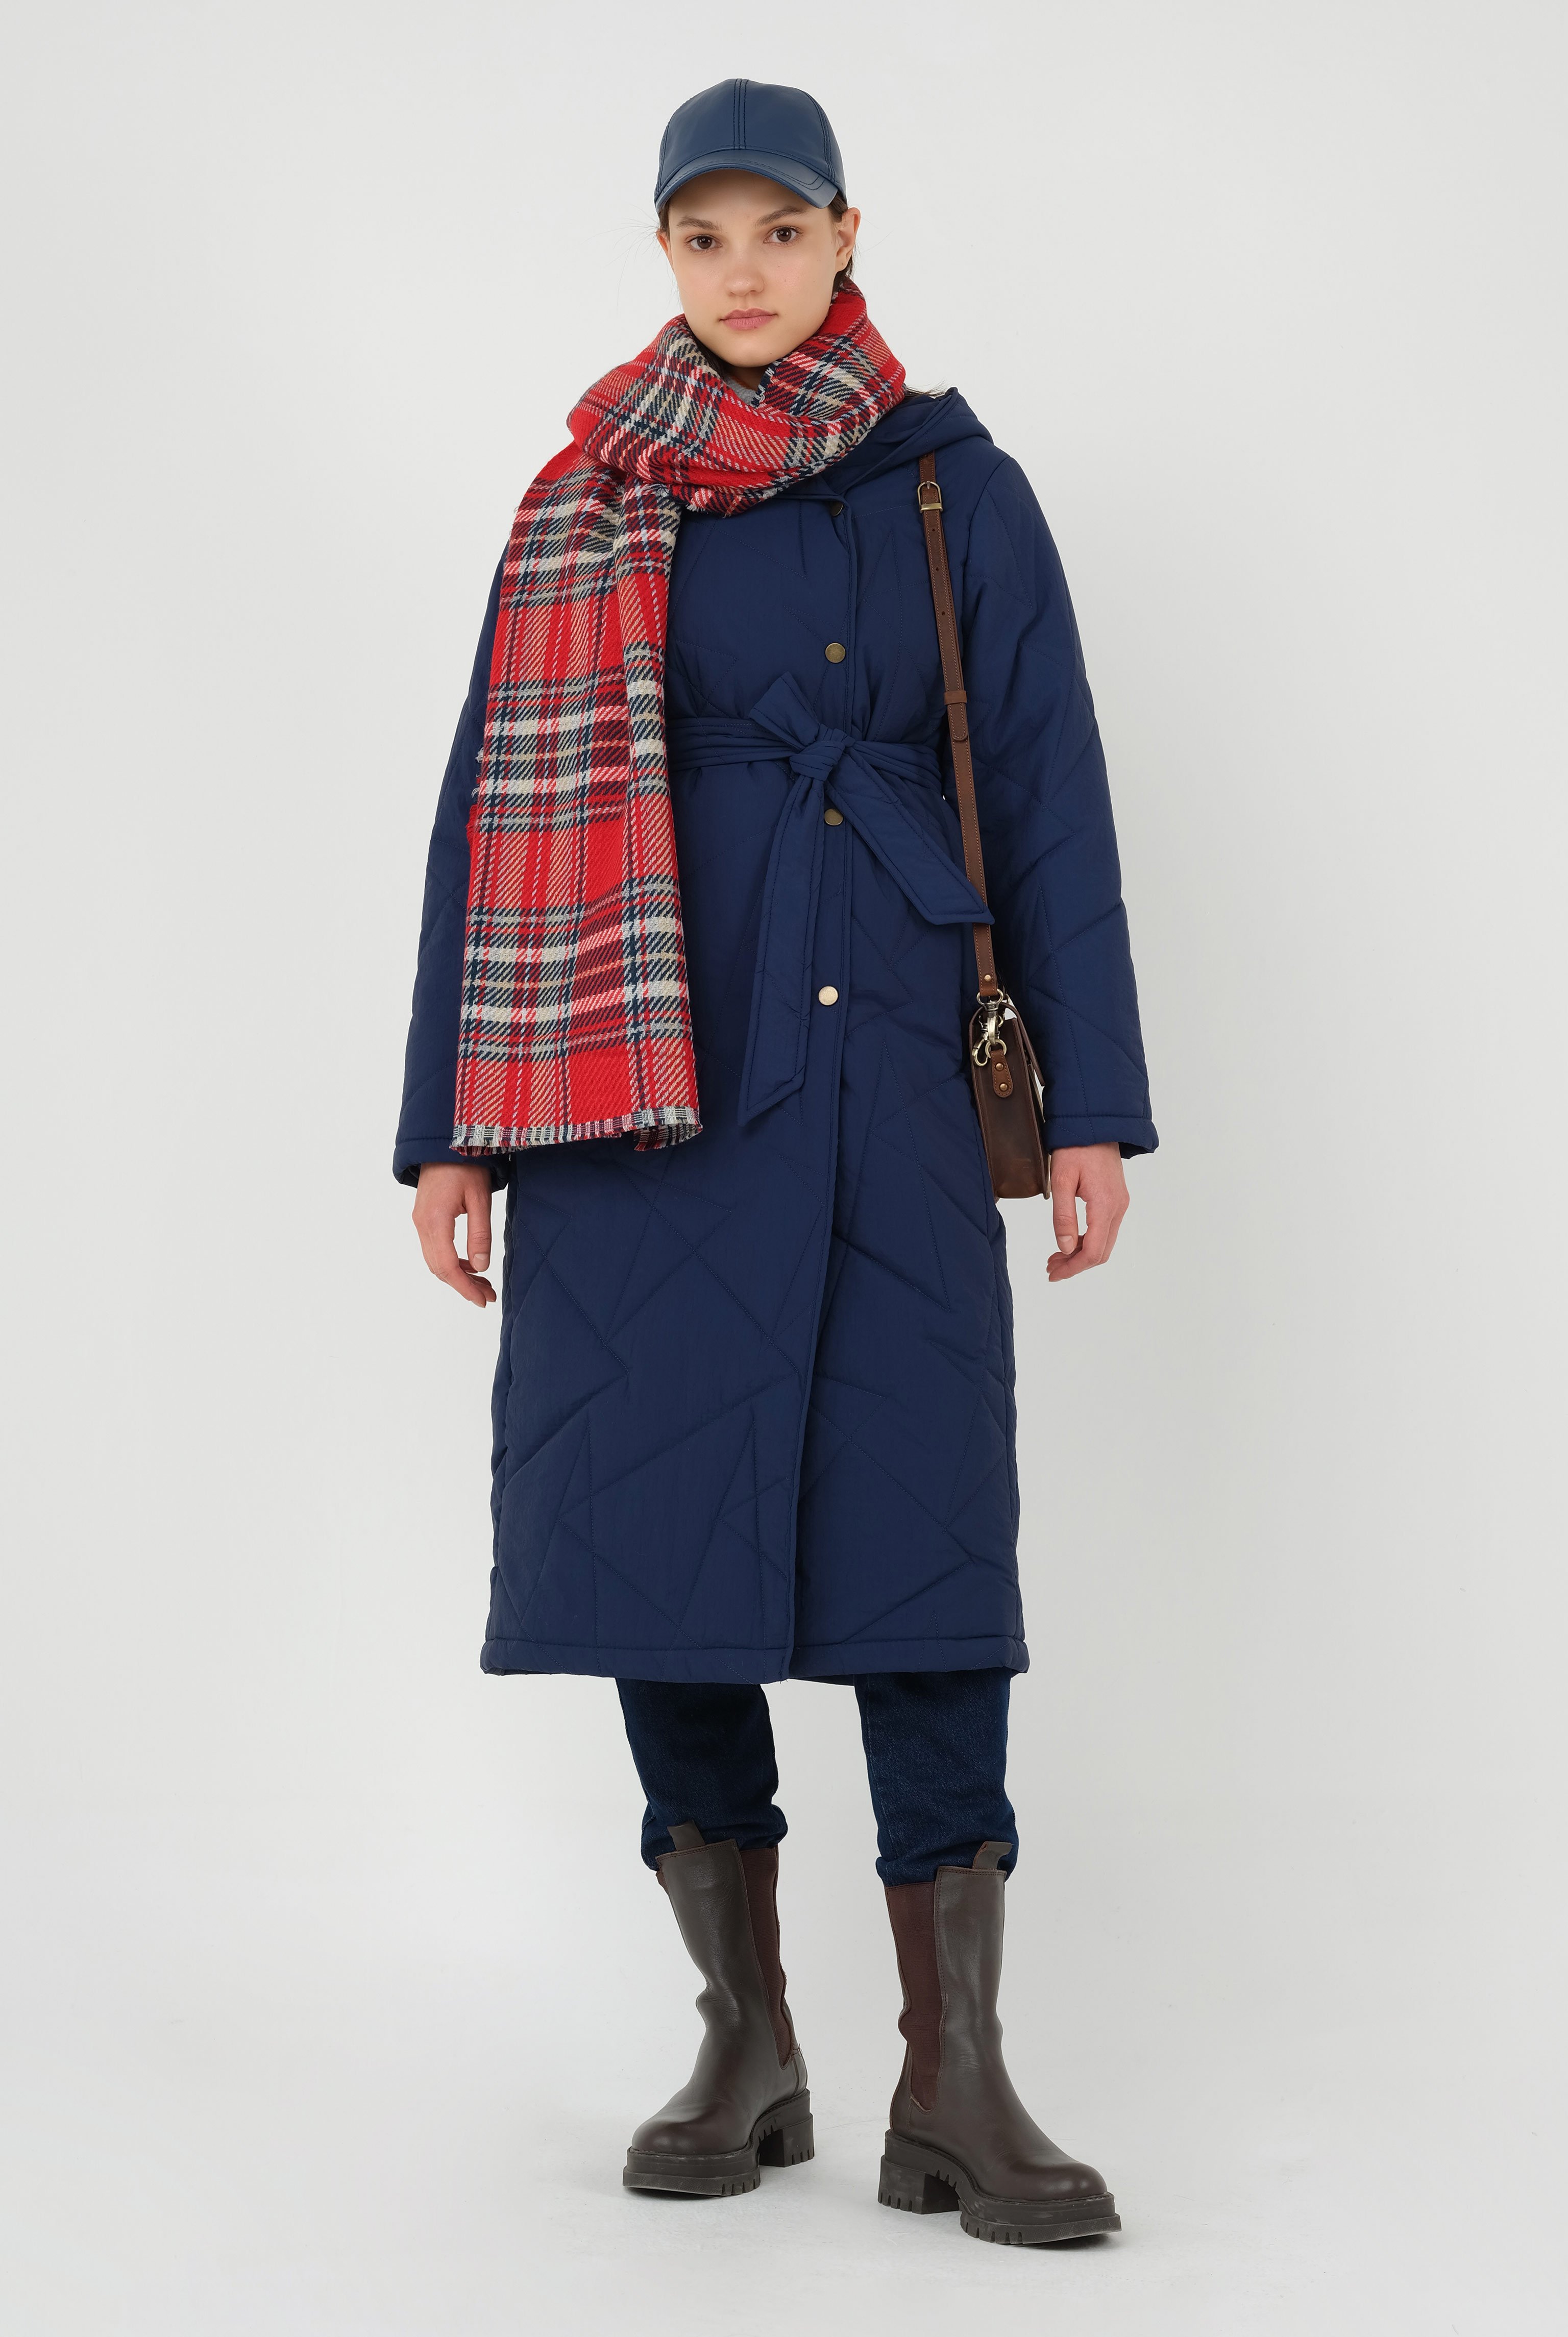 Asymmetric Patterned Quilted Coat Navy Blue 